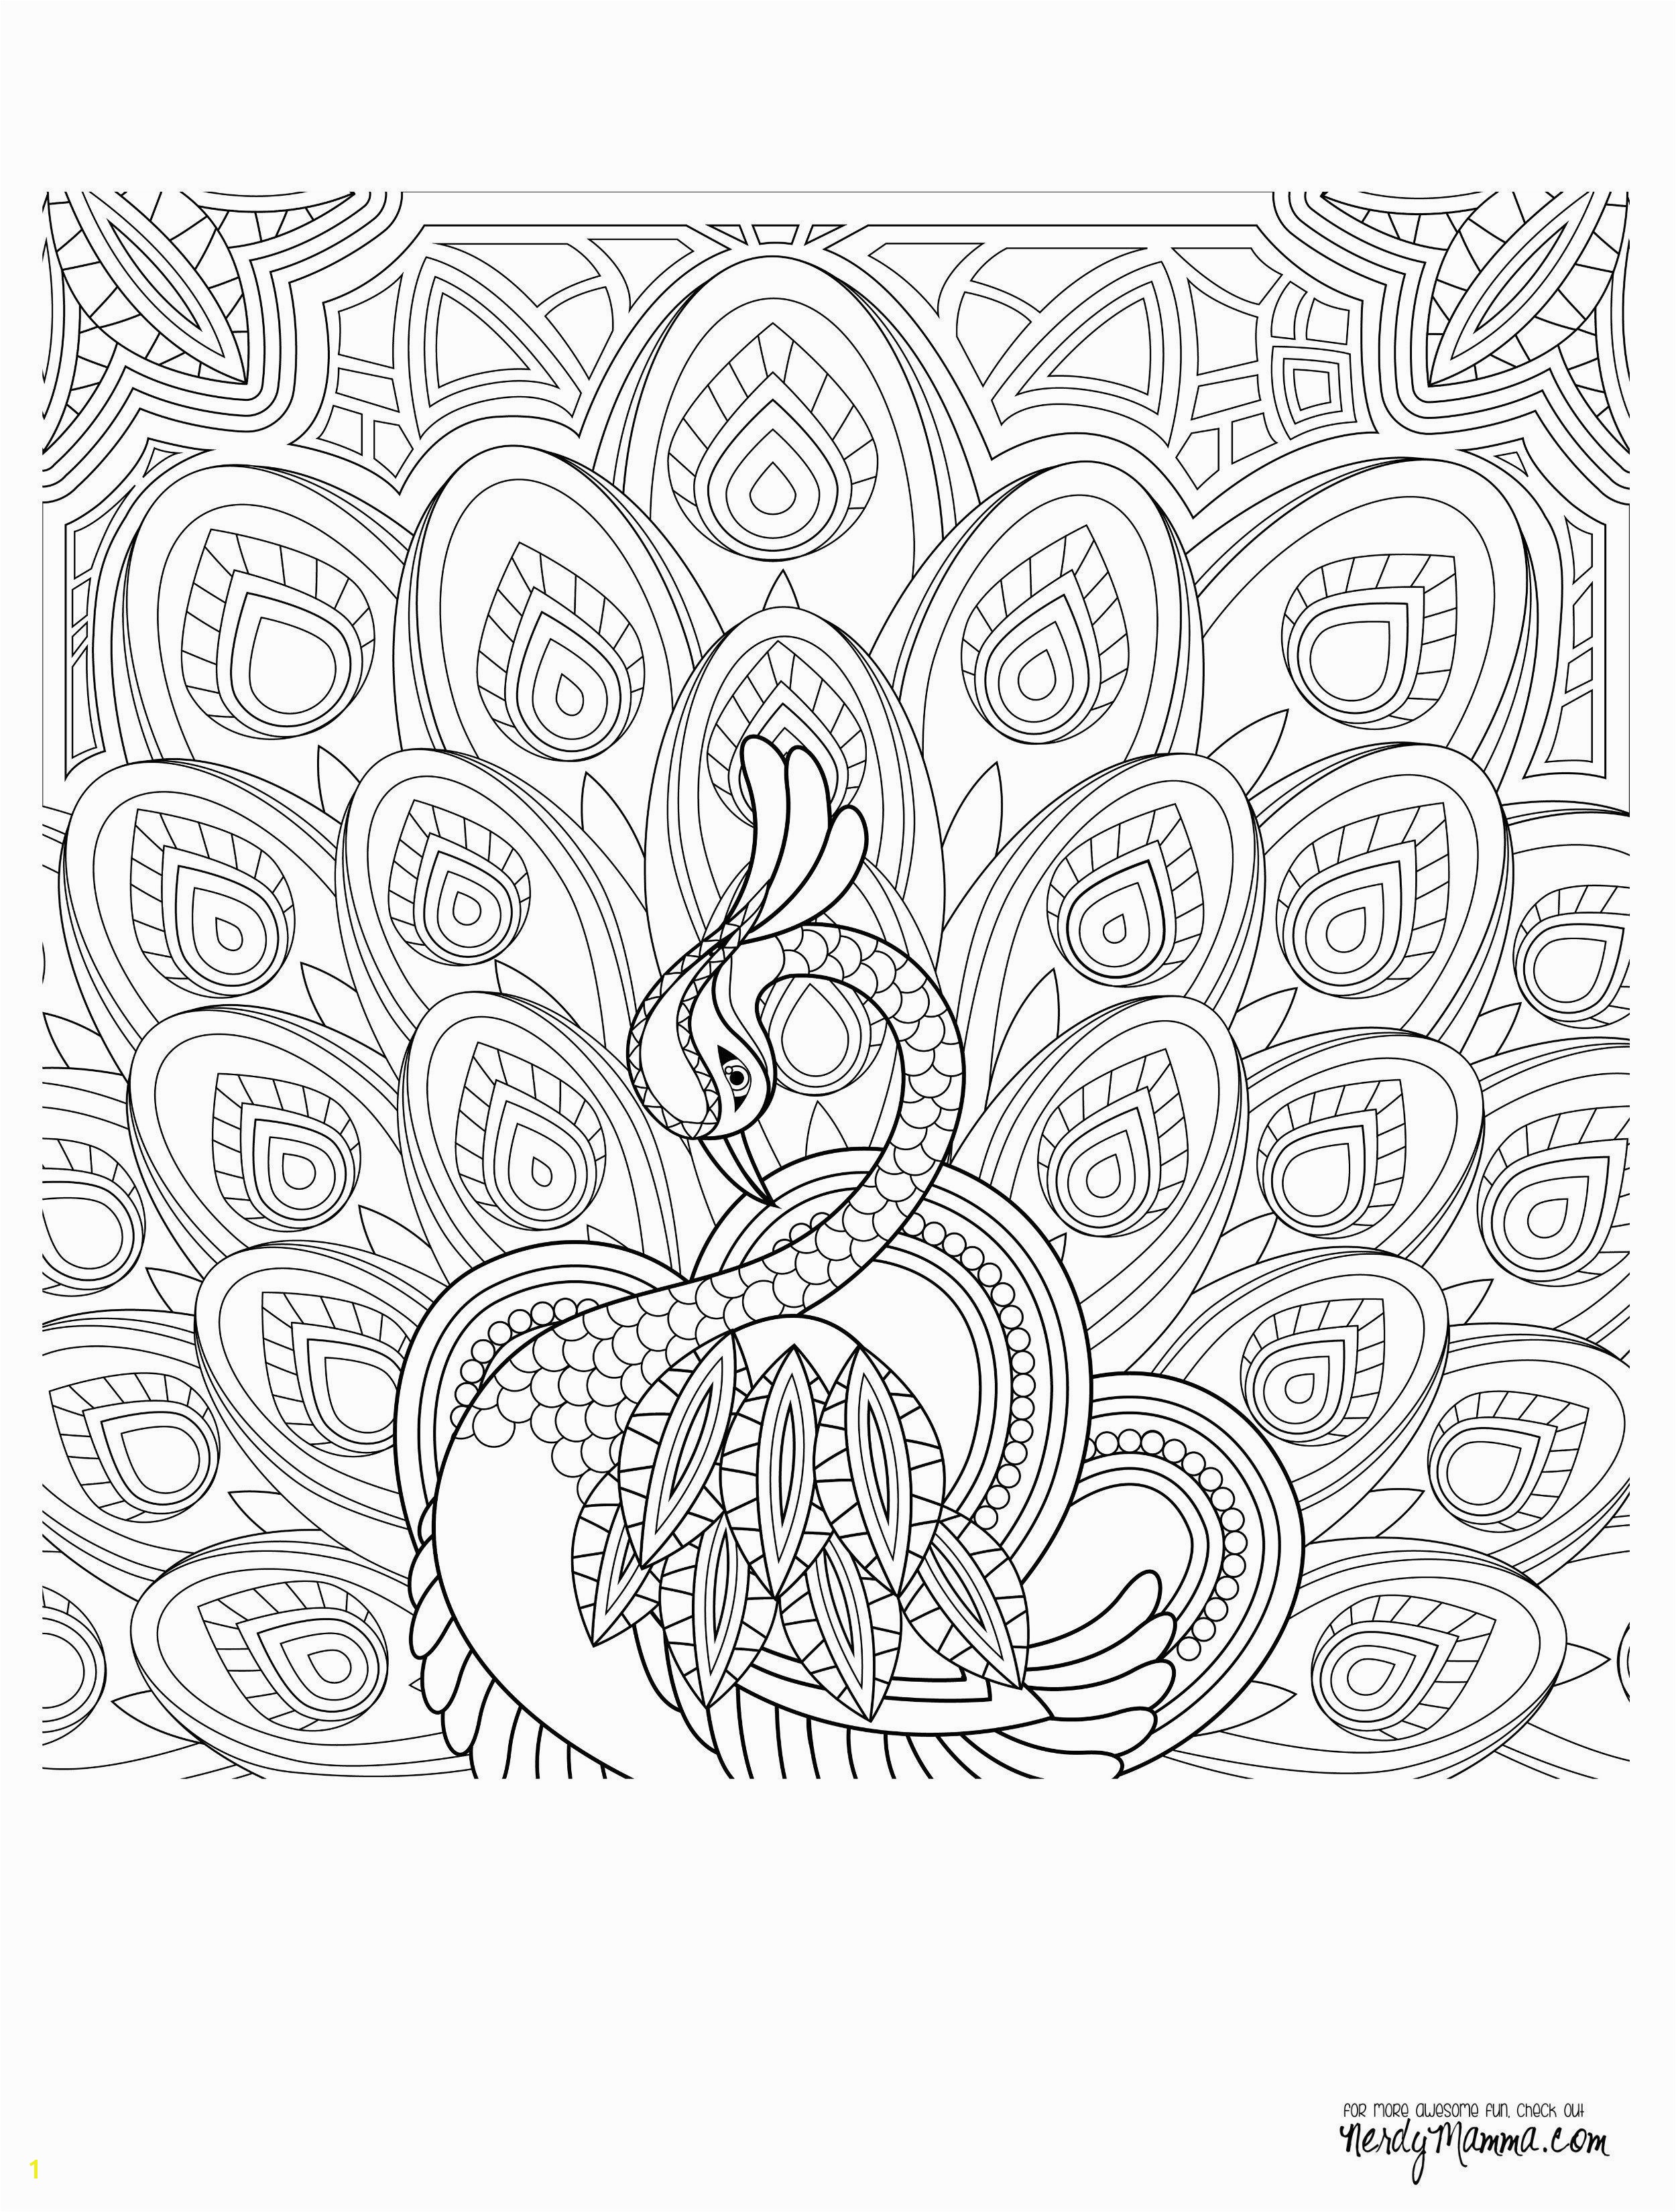 Free Coloring Pages for Christmas Coloring Pages for Christmas Time 2018 Colouring In New New